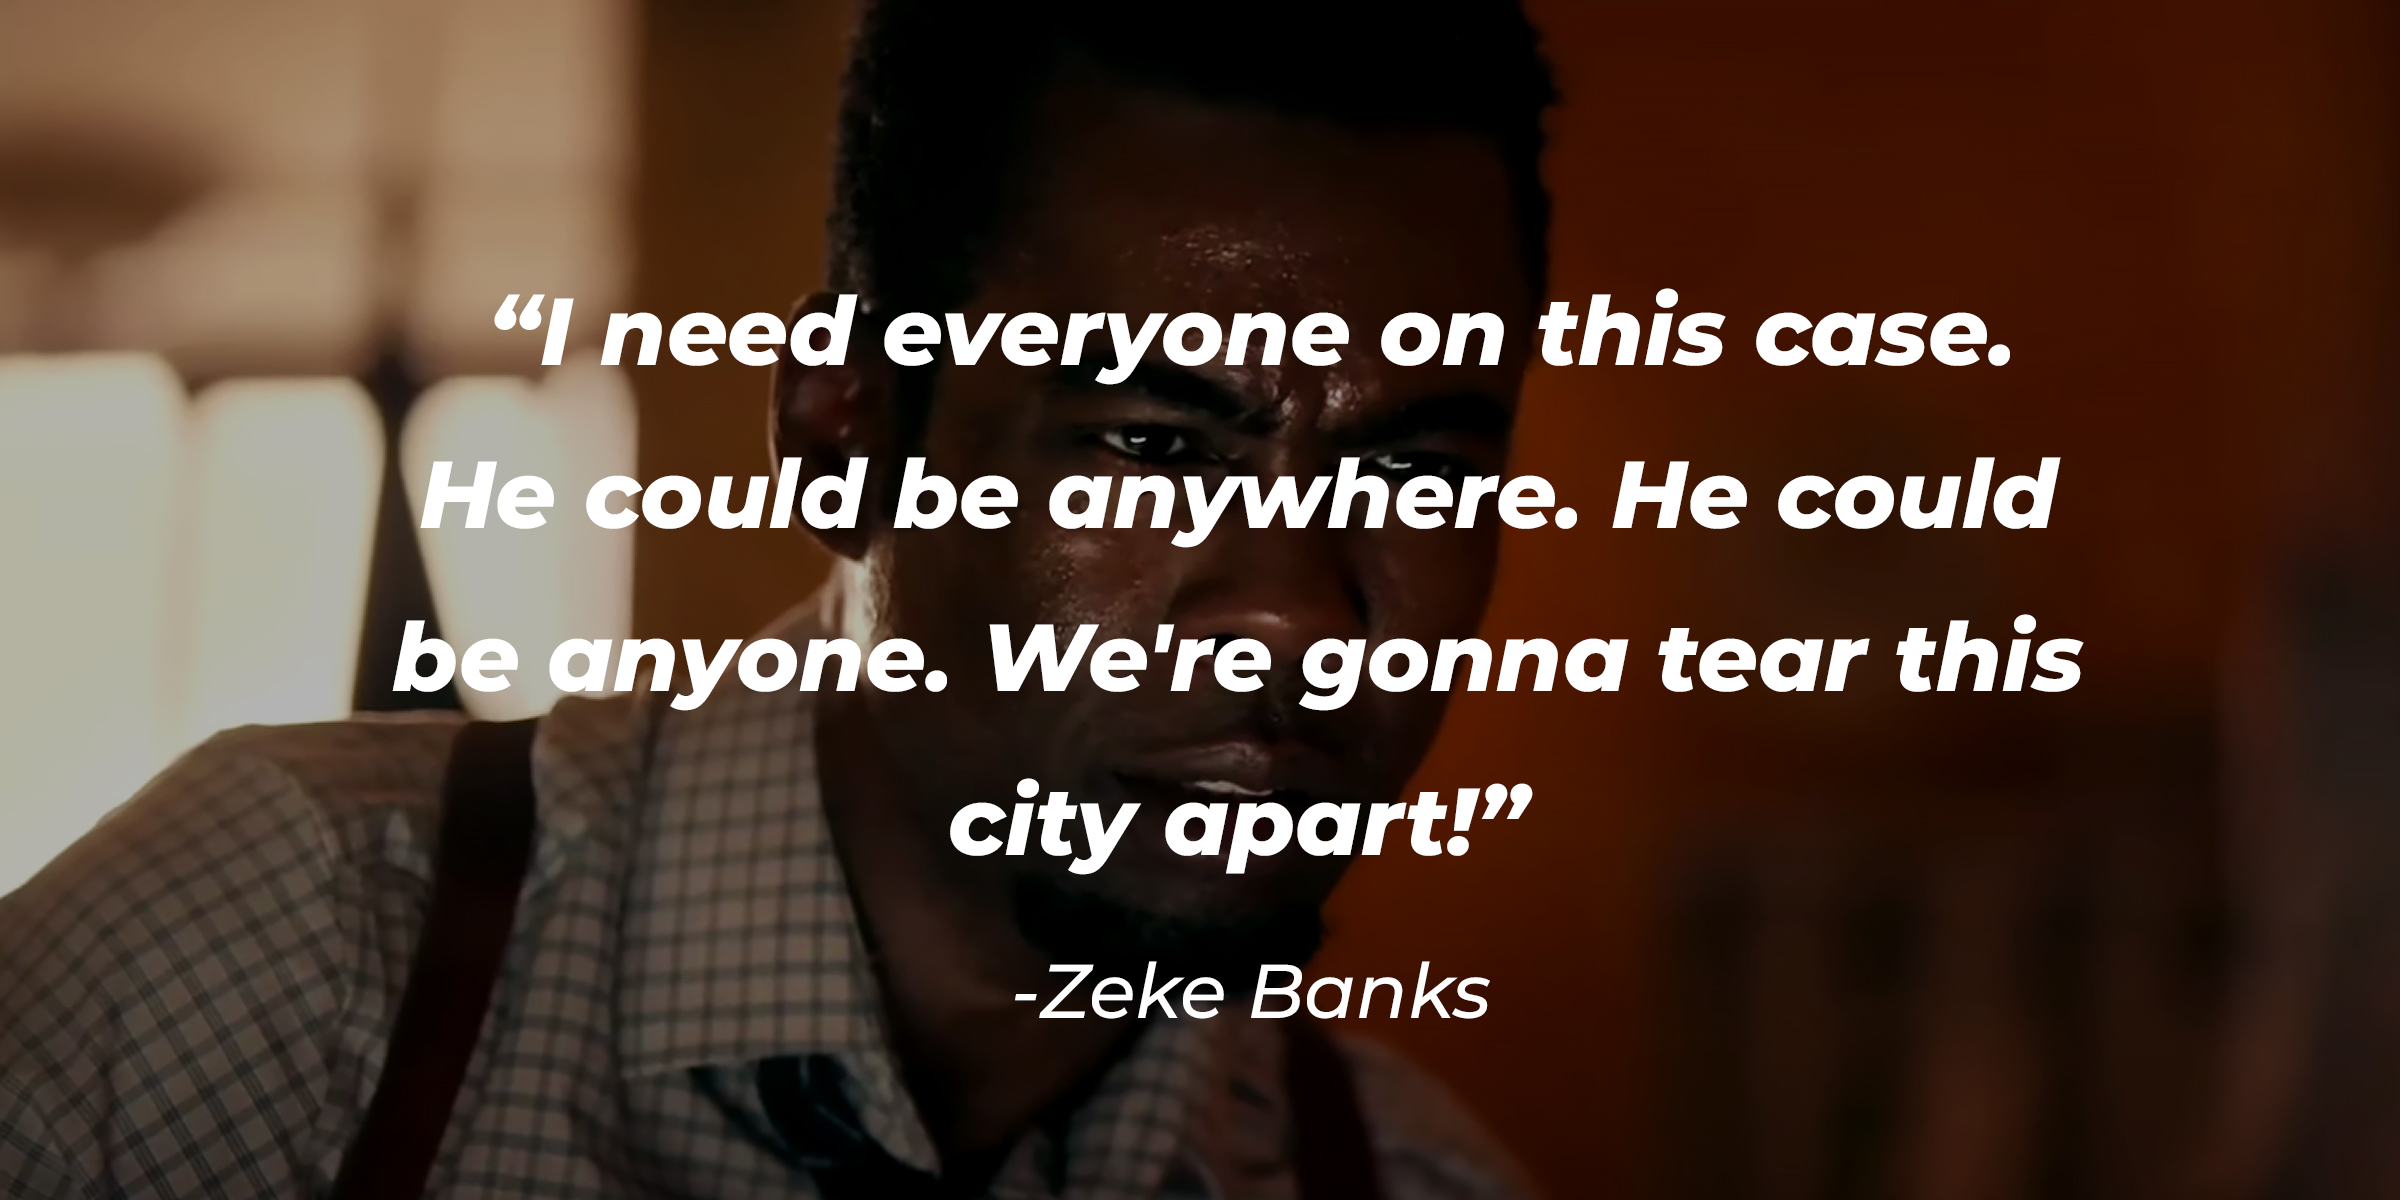 Zeke Banks's quote: “I need everyone on this case. He could be anywhere. He could be anyone. We're gonna tear this city apart!” | Source: youtube.com/LionsgateMovies